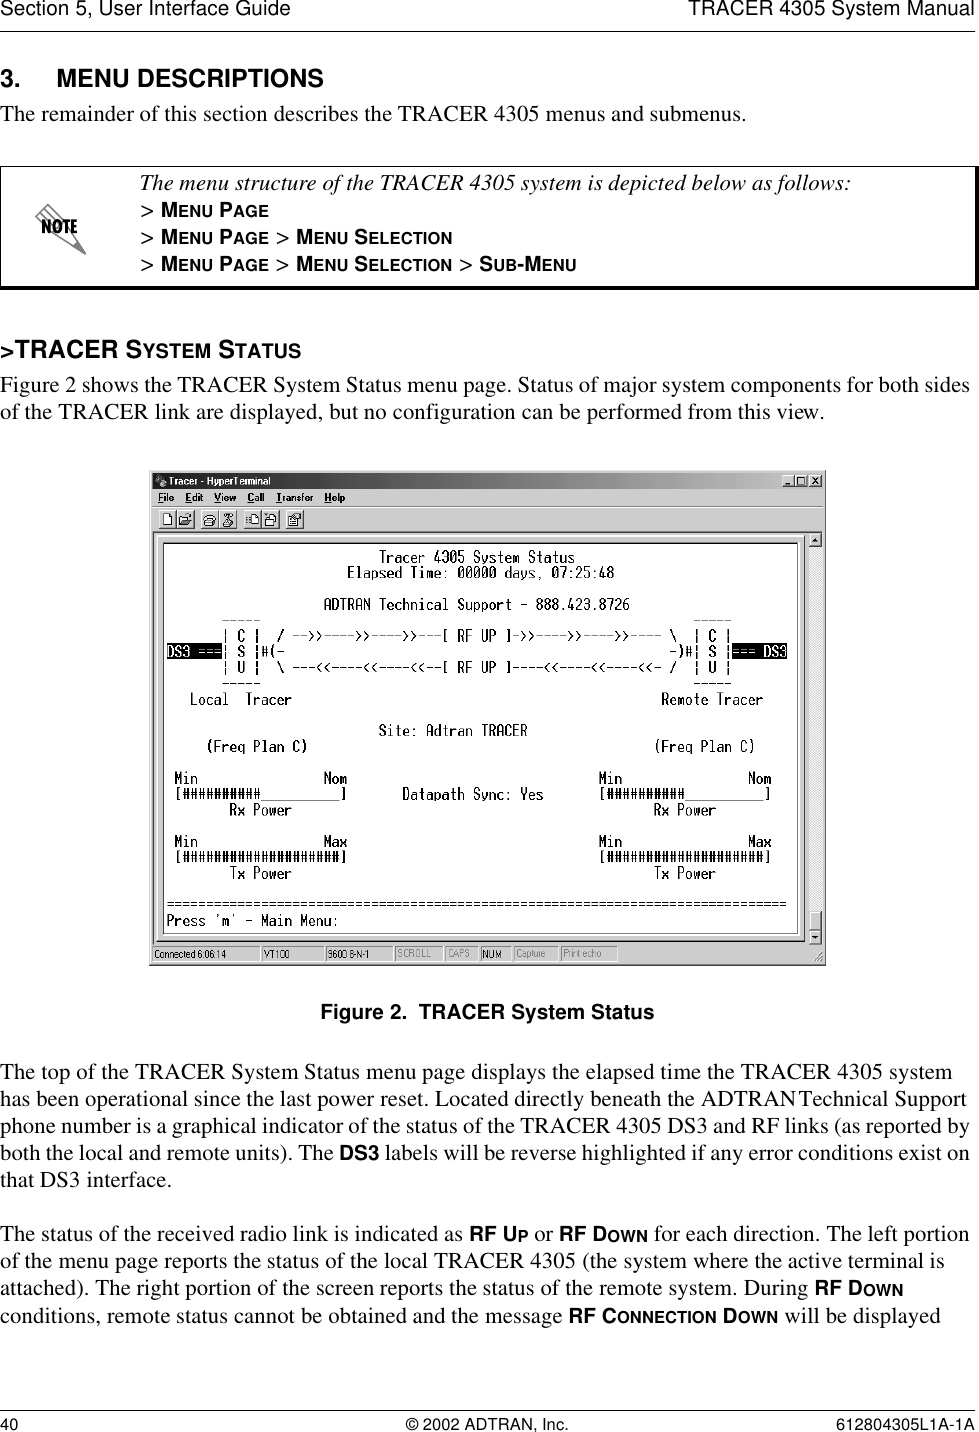 Section 5, User Interface Guide TRACER 4305 System Manual40 © 2002 ADTRAN, Inc. 612804305L1A-1A3. MENU DESCRIPTIONSThe remainder of this section describes the TRACER 4305 menus and submenus. &gt;TRACER SYSTEM STATUSFigure 2 shows the TRACER System Status menu page. Status of major system components for both sides of the TRACER link are displayed, but no configuration can be performed from this view.Figure 2.  TRACER System StatusThe top of the TRACER System Status menu page displays the elapsed time the TRACER 4305 system has been operational since the last power reset. Located directly beneath the ADTRAN Technical Support phone number is a graphical indicator of the status of the TRACER 4305 DS3 and RF links (as reported by both the local and remote units). The DS3 labels will be reverse highlighted if any error conditions exist on that DS3 interface.The status of the received radio link is indicated as RF UP or RF DOWN for each direction. The left portion of the menu page reports the status of the local TRACER 4305 (the system where the active terminal is attached). The right portion of the screen reports the status of the remote system. During RF DOWN conditions, remote status cannot be obtained and the message RF CONNECTION DOWN will be displayed The menu structure of the TRACER 4305 system is depicted below as follows:&gt; MENU PAGE&gt; MENU PAGE &gt; MENU SELECTION&gt; MENU PAGE &gt; MENU SELECTION &gt; SUB-MENU